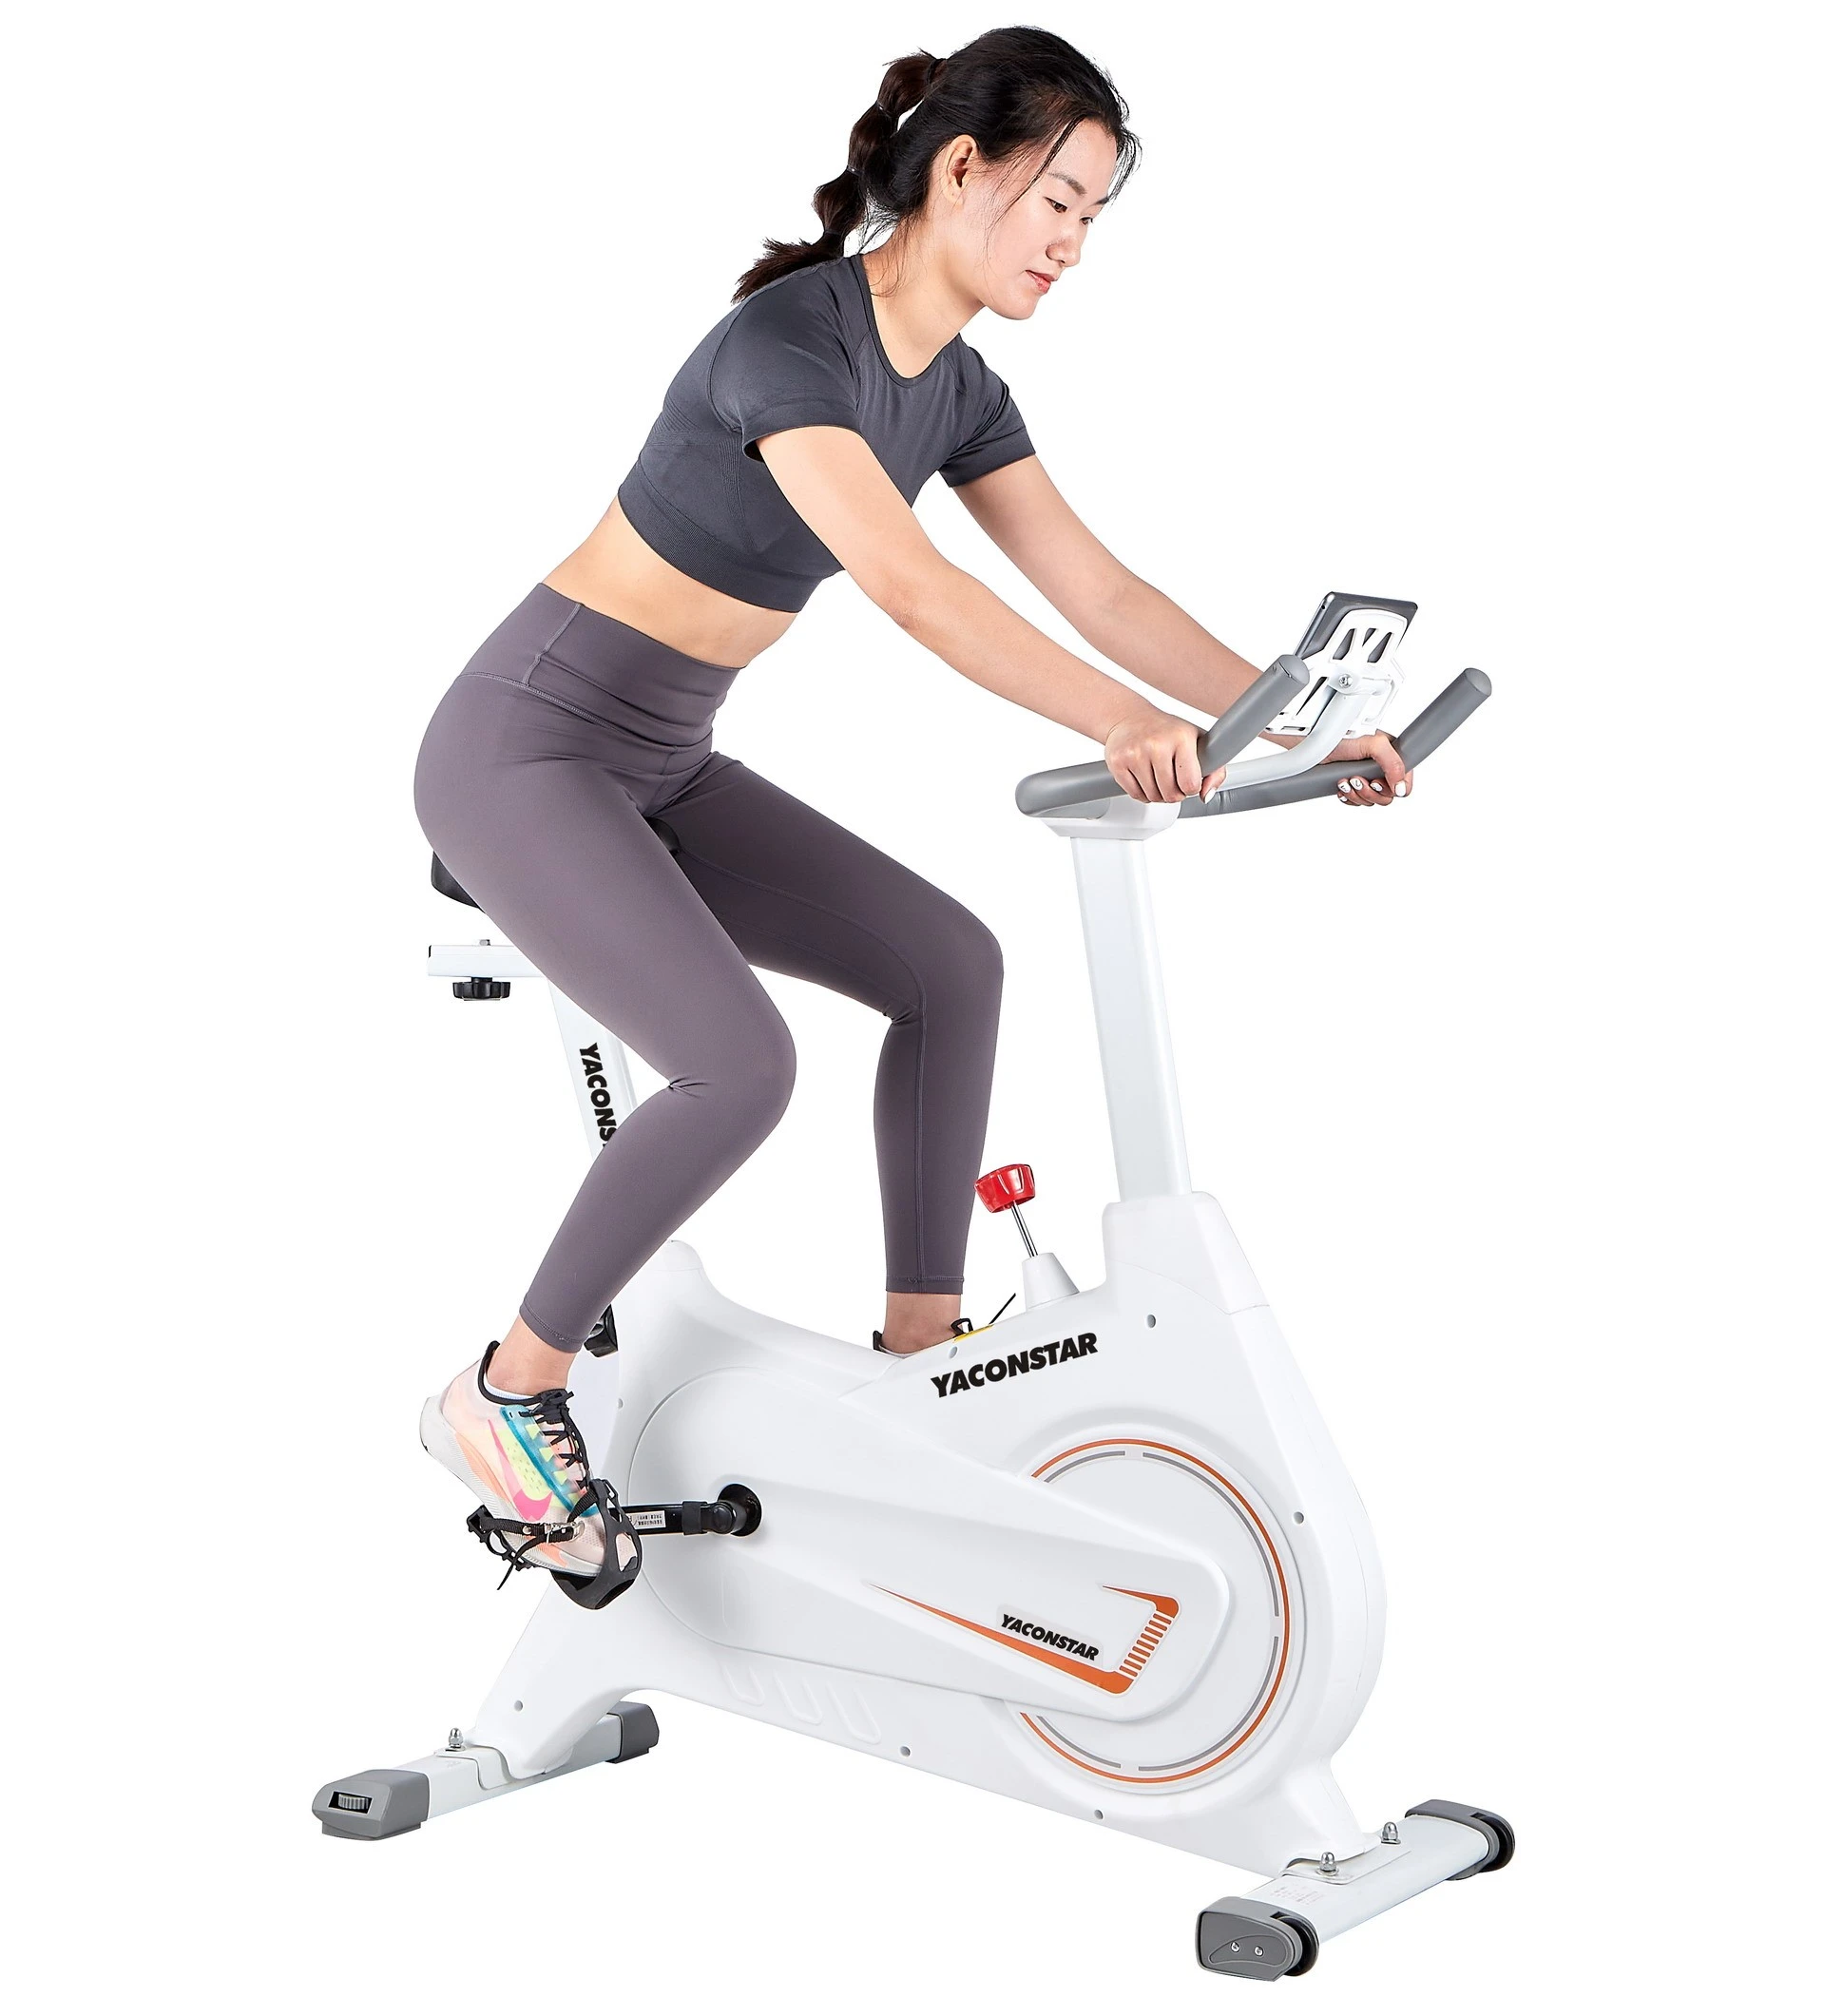 Indoor Stationary Spin Bikes Cardio Fitness Magnetic Resistance Cheap Exercise Spinning Bike With Scree For Gym Sale